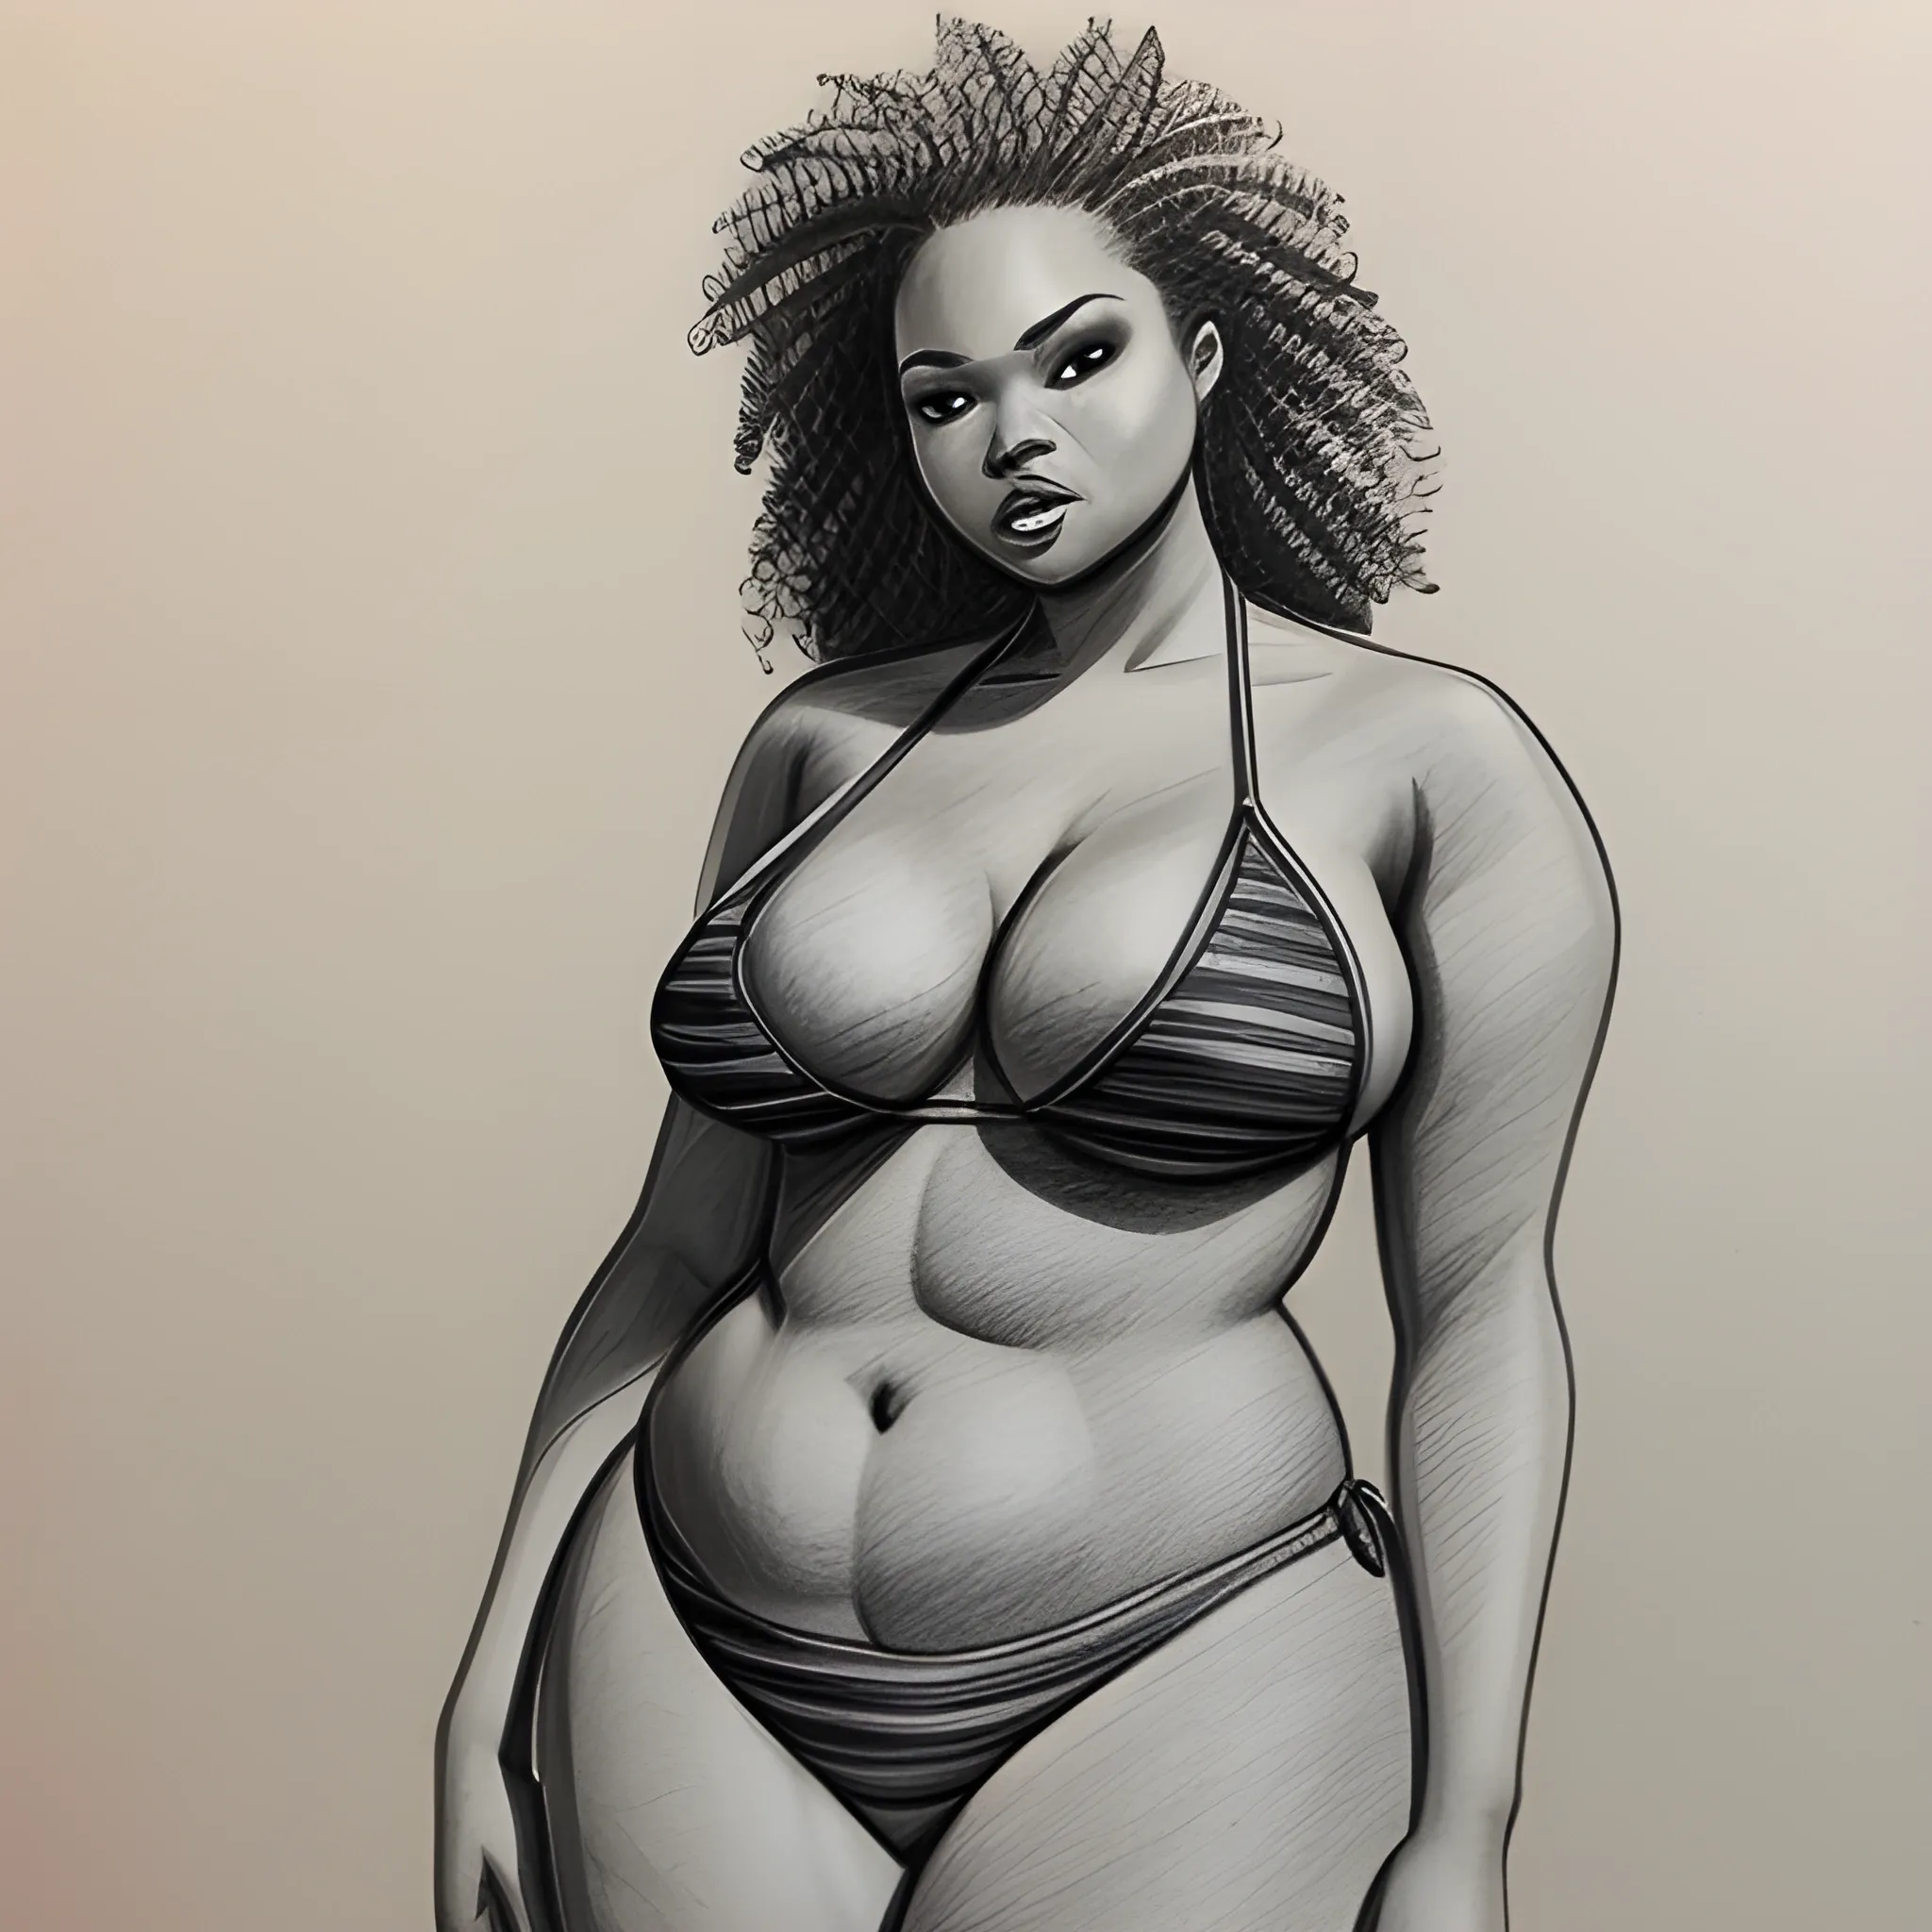 curvy woman with mixed skin in a luxury bikini standing up
,, Pencil Sketch